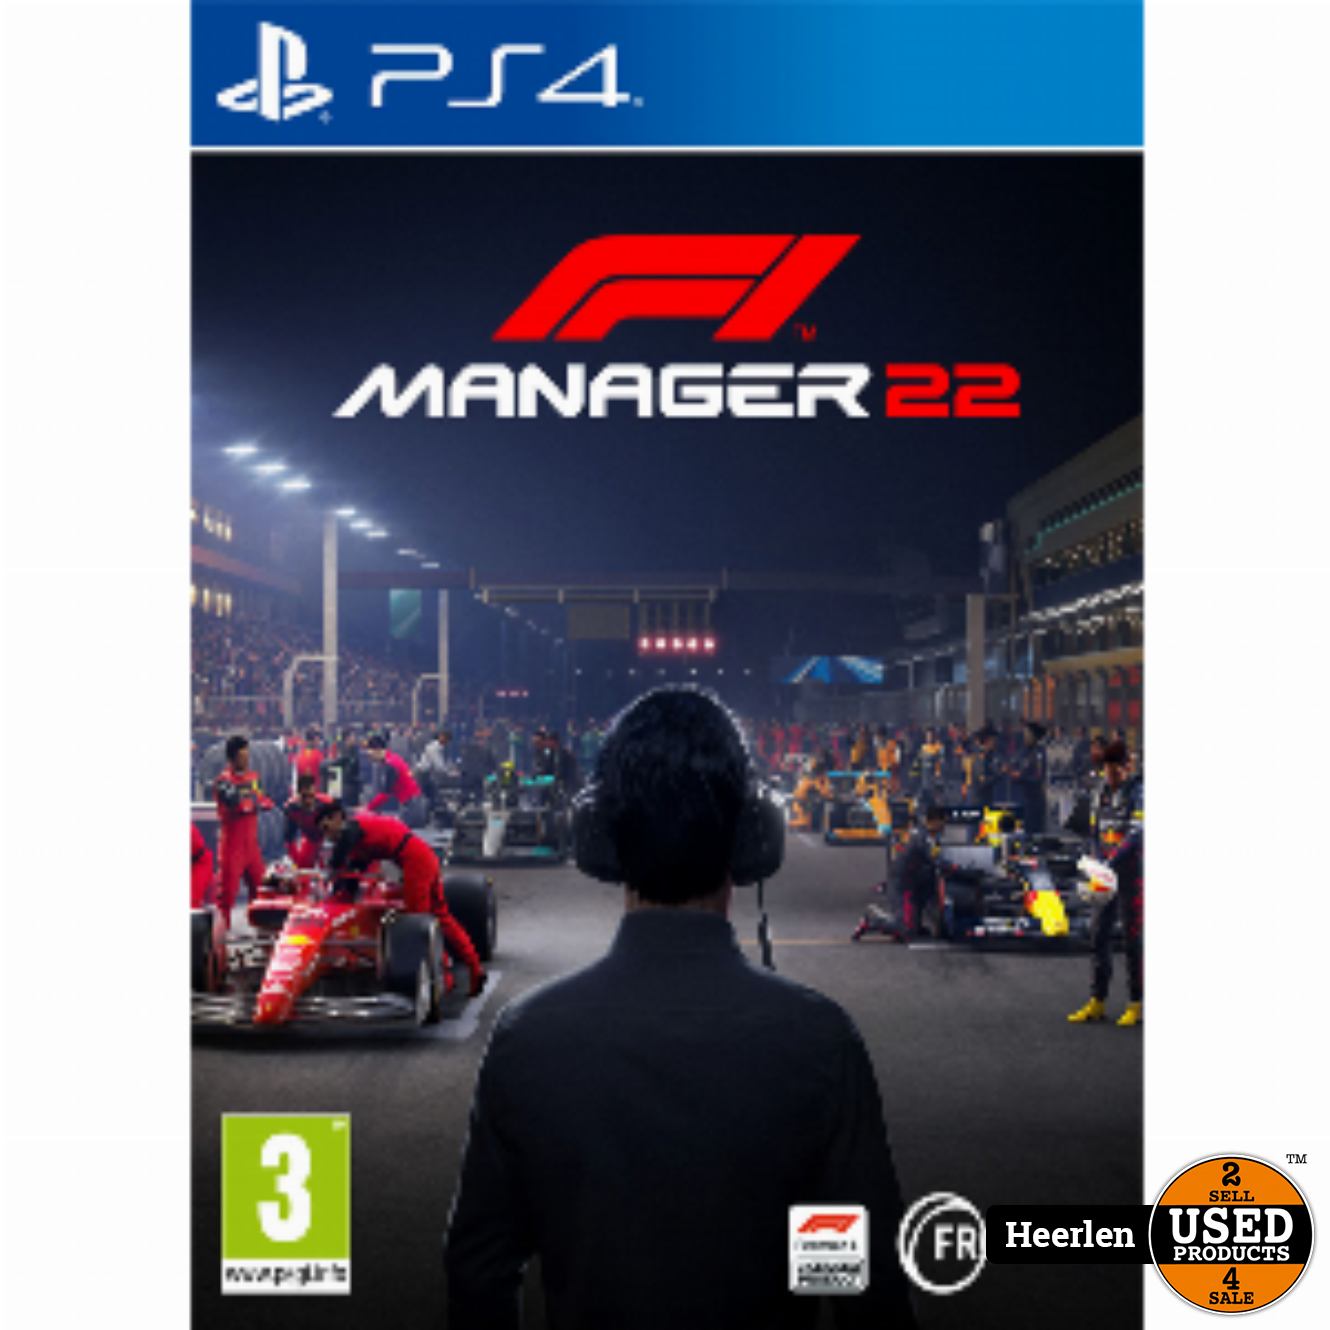 Bulk gewoontjes levering Sony Formula 1 Manager 2022 | PlayStation 4 Game | B-Grade - Used Products  Heerlen